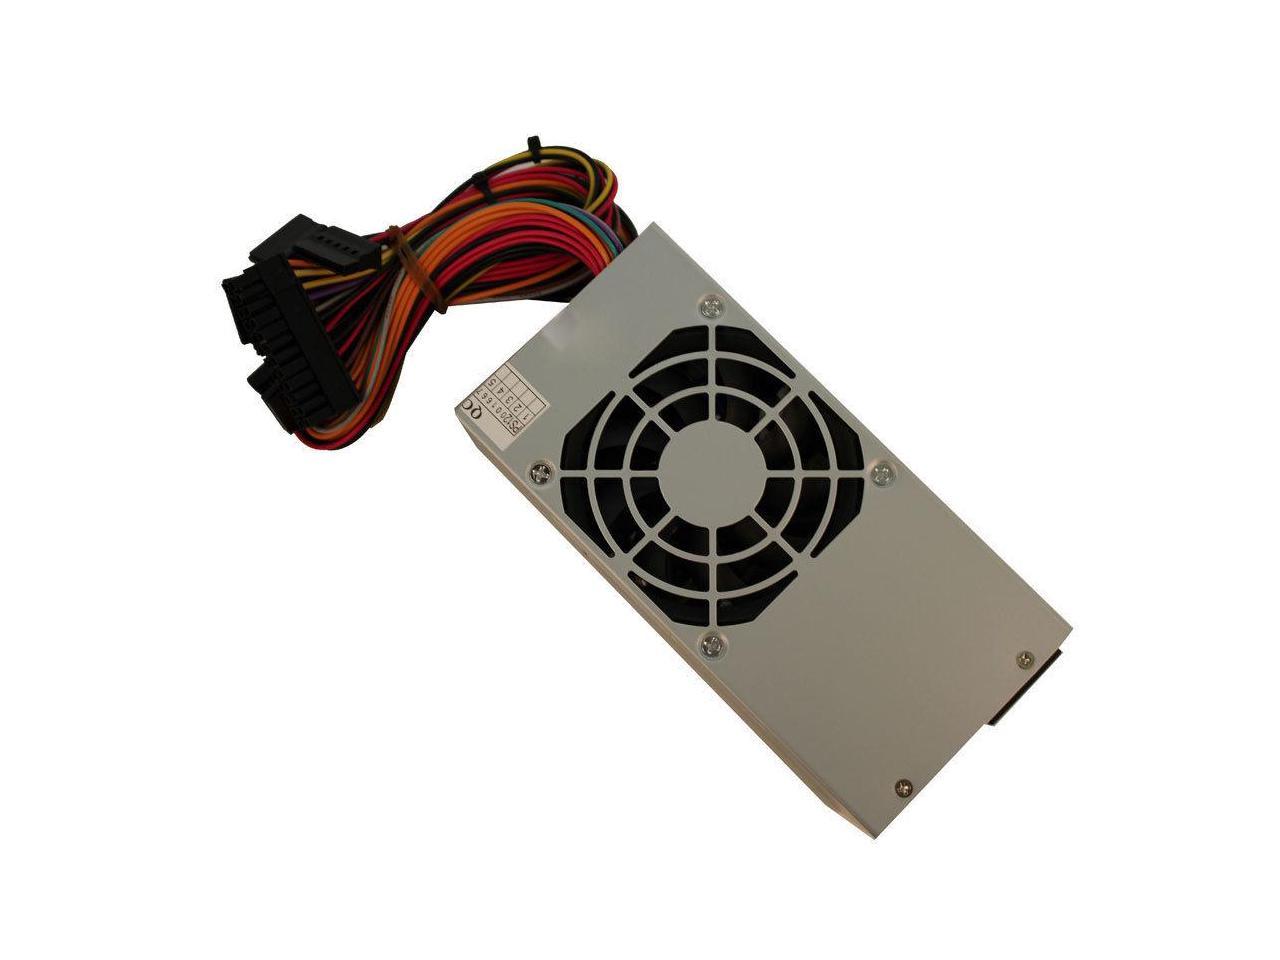 New PC Power Supply Upgrade for HP Pavilion s5212y Slimline SFF Computer 